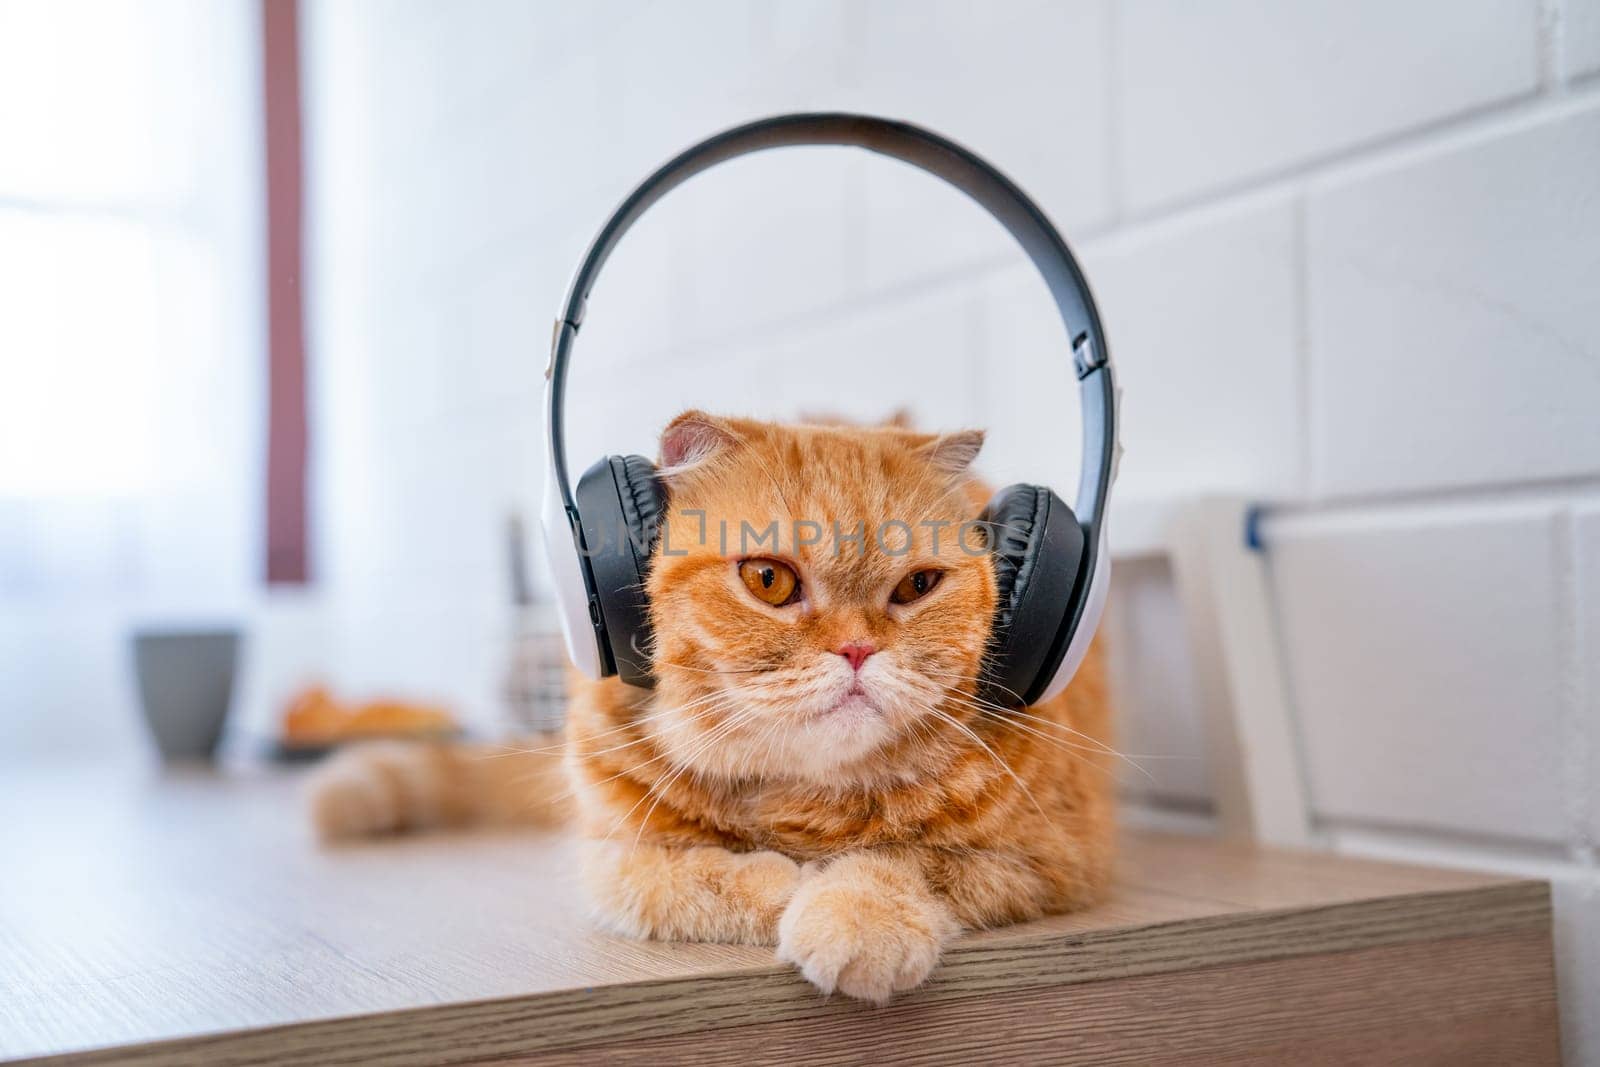 Orange cat with headphone lie on table also look forward and relax to stay alone in the room with day light.